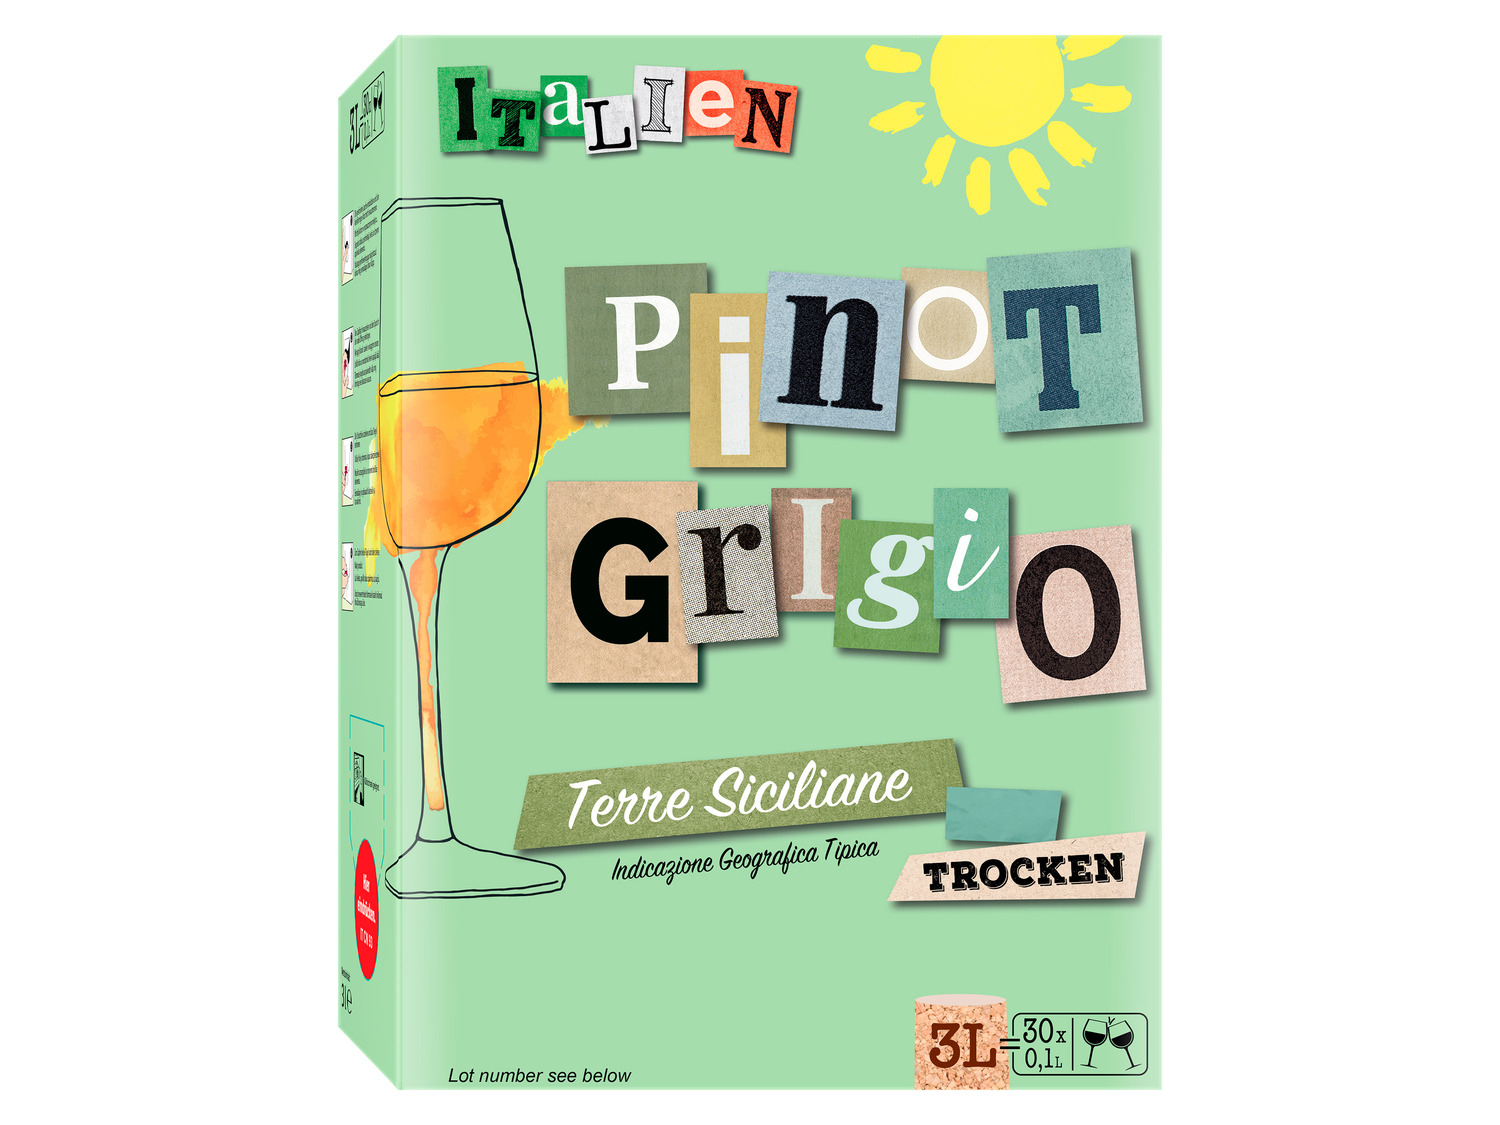 ᐉ Products like: terre Compare trocken Lidl 2023 pinot Price weißwein in / l bag igt - grigio 0 3 siciliane box